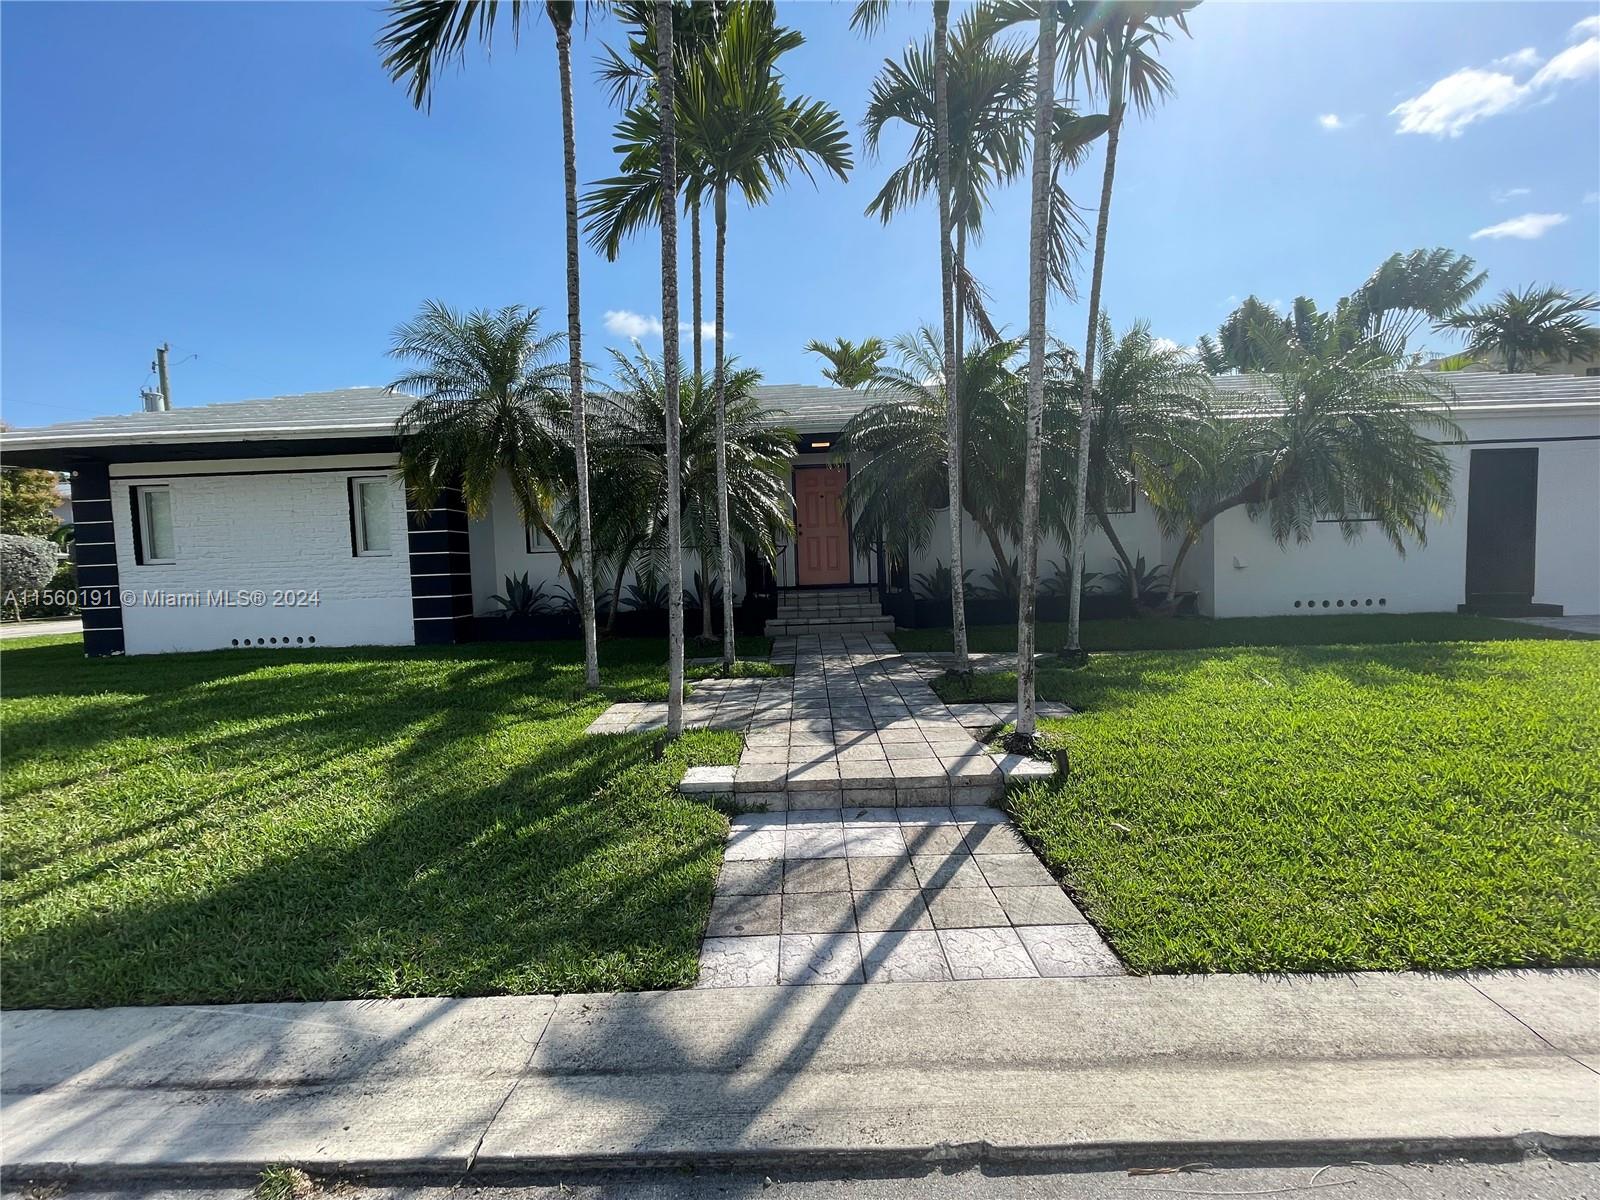 Nice quiet neighborhood on the Venetian Islands in Miami Beach. Updated house with open floor-plan kitchen, stainless steel appliances, marble bathrooms, wood floors and custom built-in closets, hurricane impact windows, heated pool and more. Centrally located close to the beach, Lincoln Road, restaurants, Venetian Marina and Publix supermarket.